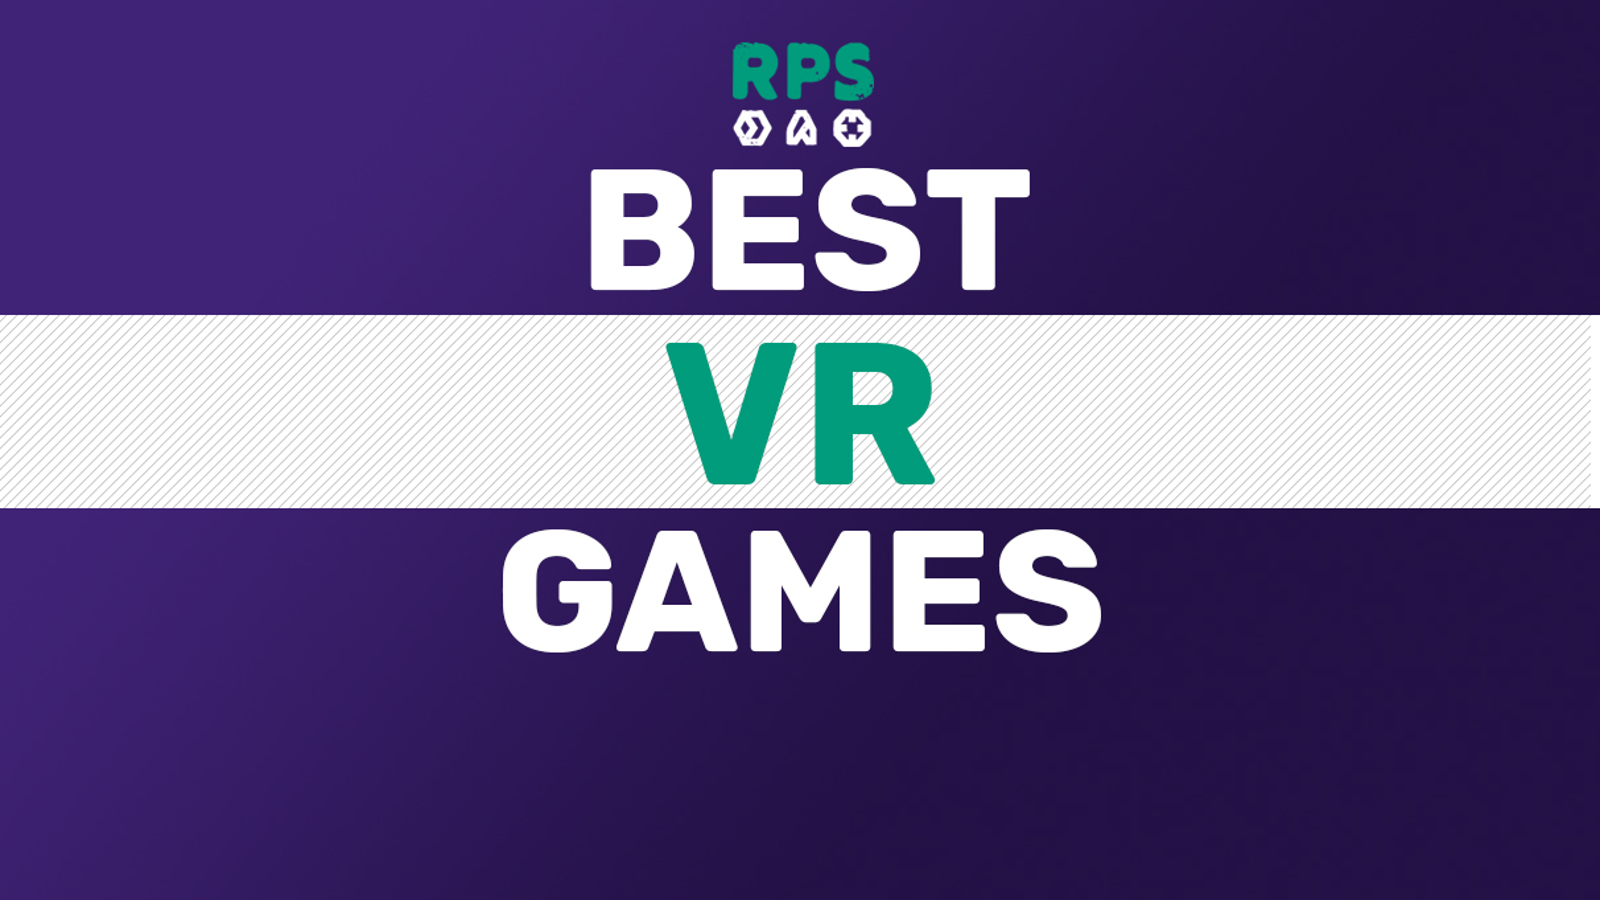 The best VR games you can play right now